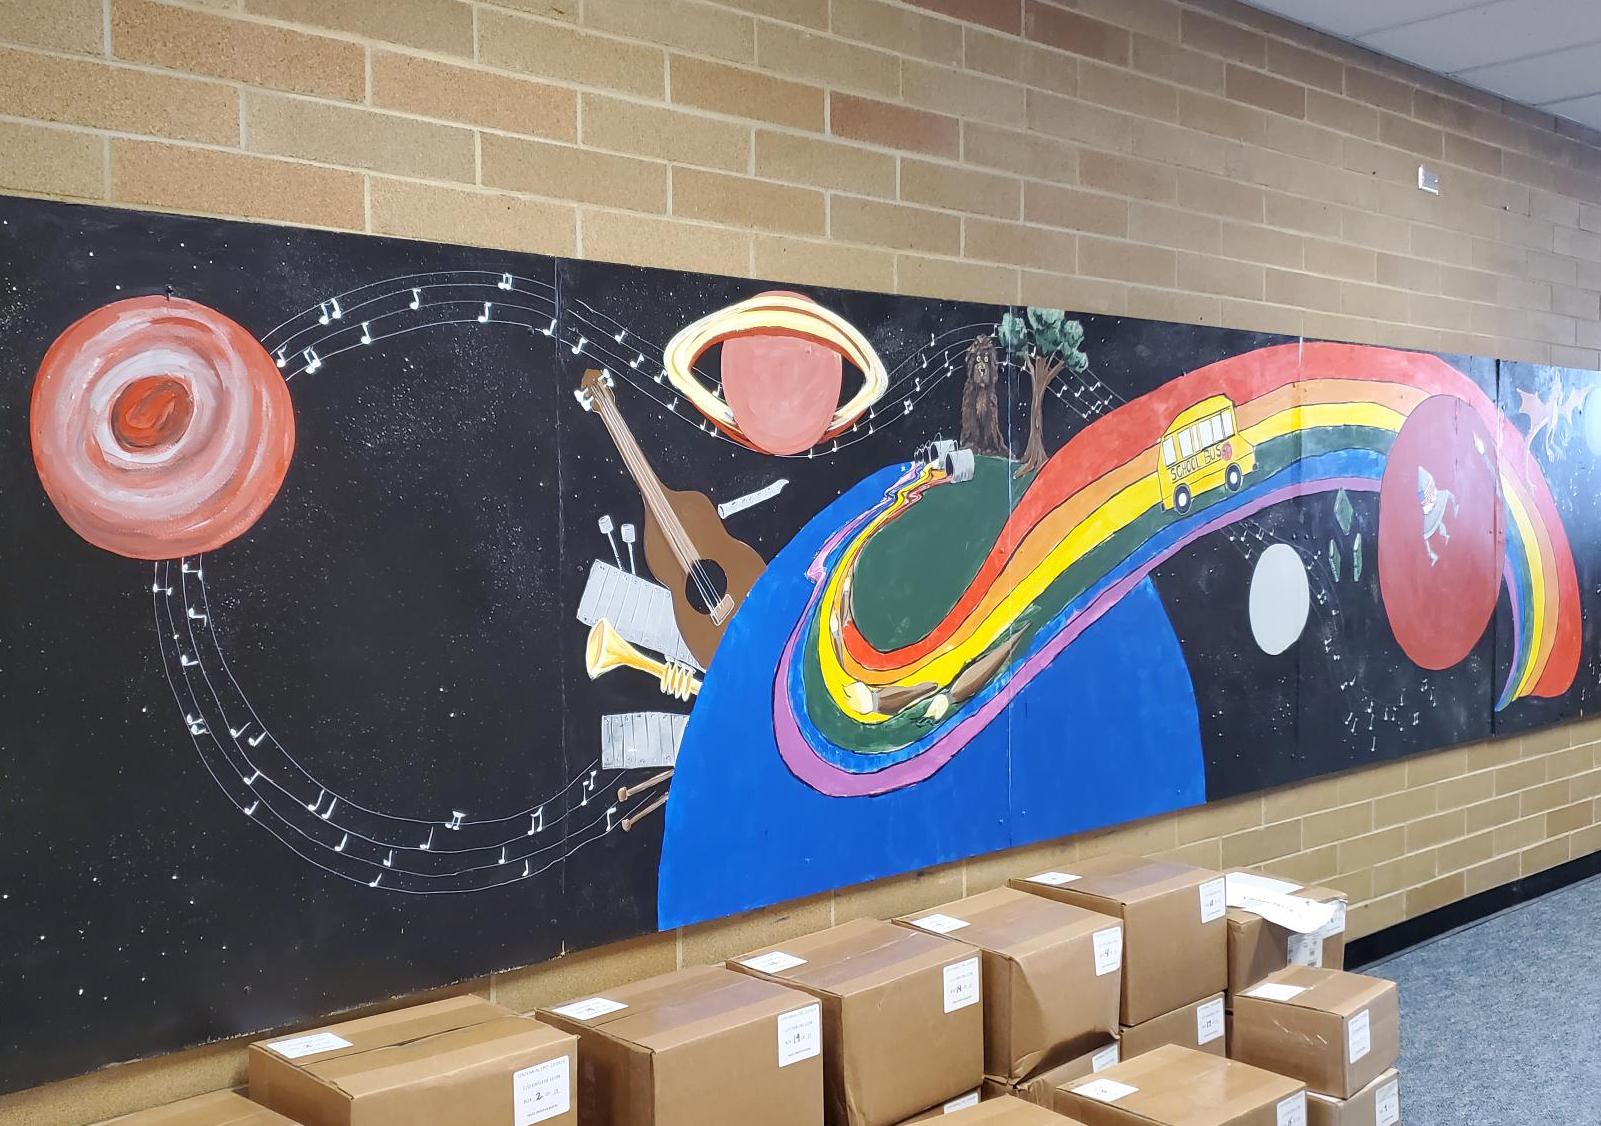 Mural of earth, planets, rainbow